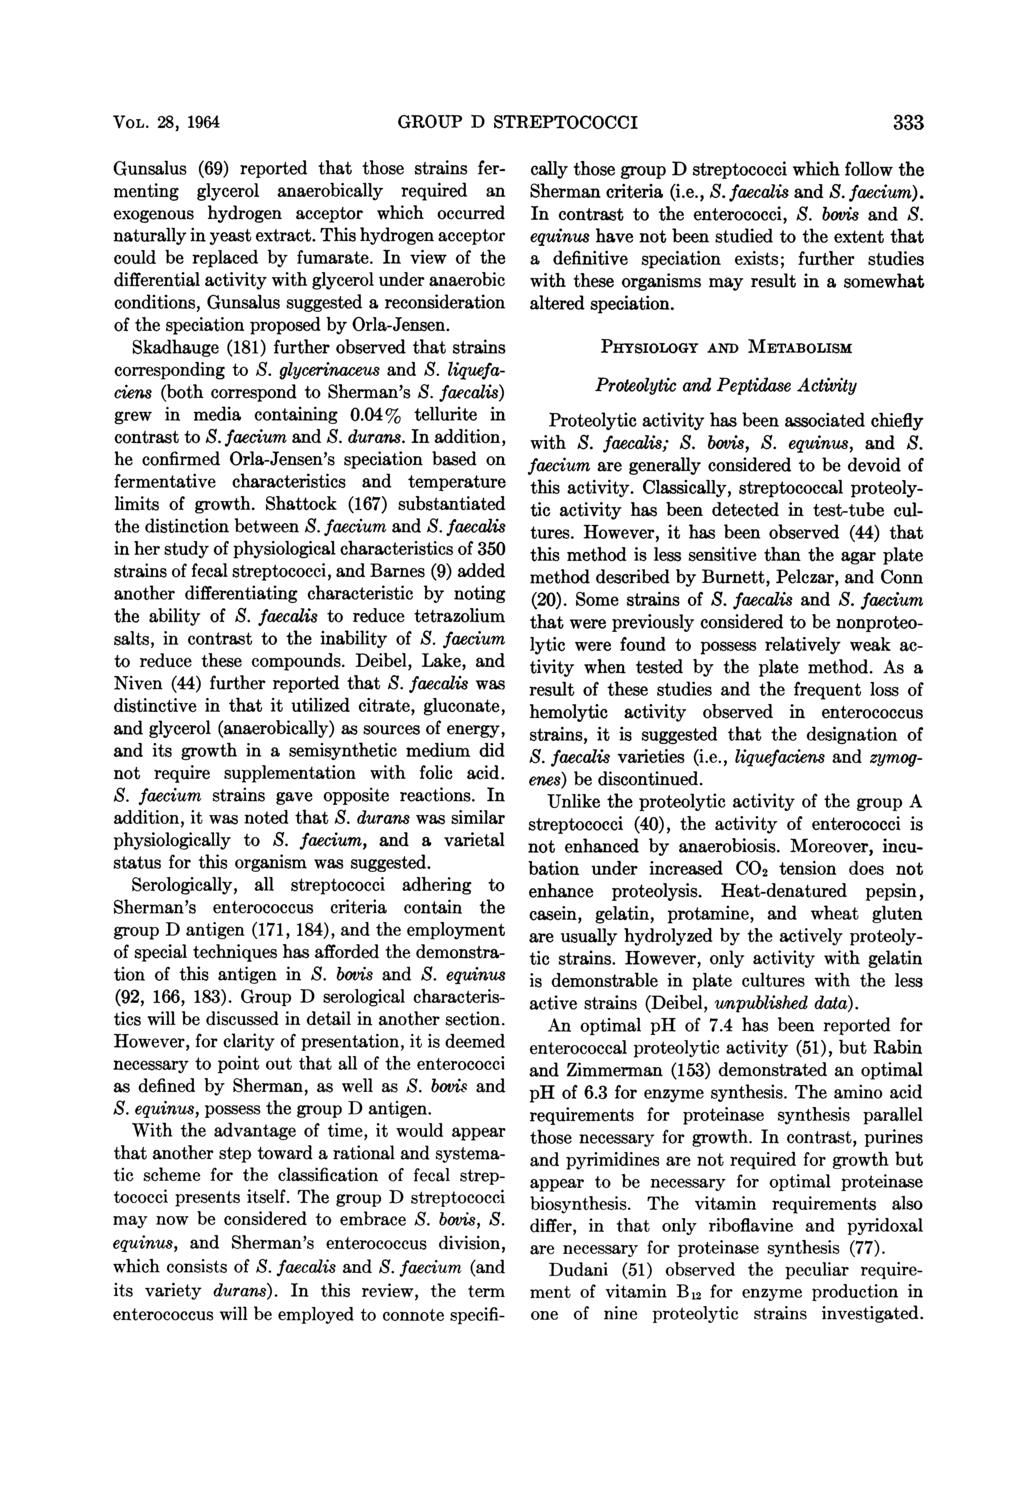 VOL. 28, 1964 GROUP D STREPTOCOCCI 333 Gunsalus (69) reported that those strains fermenting glycerol anaerobically required an exogenous hydrogen acceptor which occurred naturally in yeast extract.